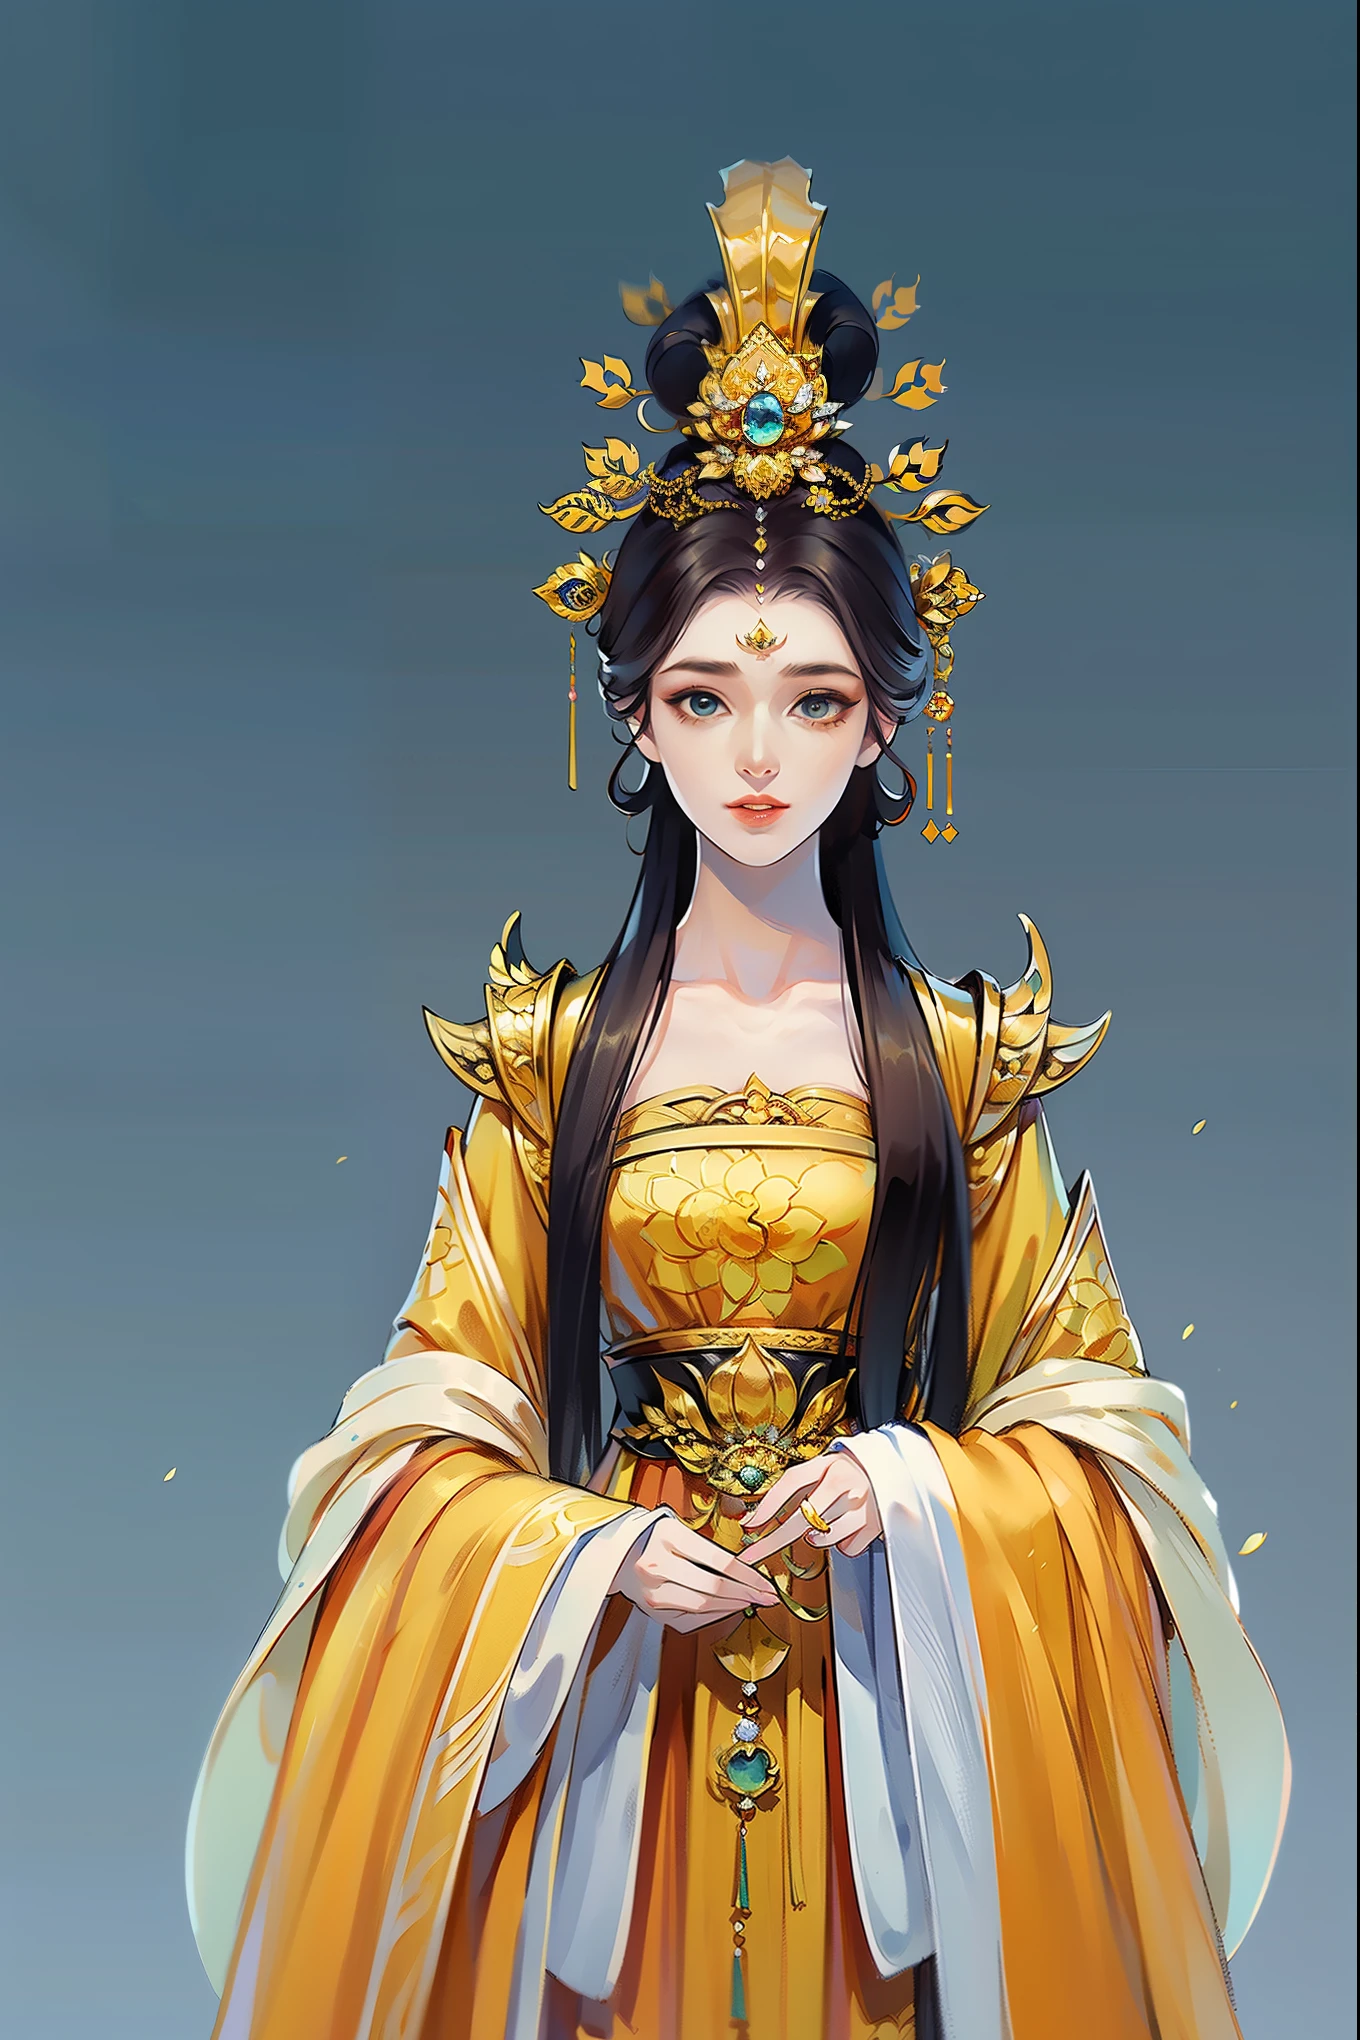 （masterpiece，super detailed，HD details，highly detailed art）1 girl，Half body，xianxia，monochrome，Gold clothes，Kingly spirit，Crown，elegant，Highly detailed character designs from East Asia，Game character costume design，simple，ultra high resolution, sharp focus, epic work, masterpiece, (Very detailed CG unified 8k wallpaper)，pretty face，beautiful eyes，HD details